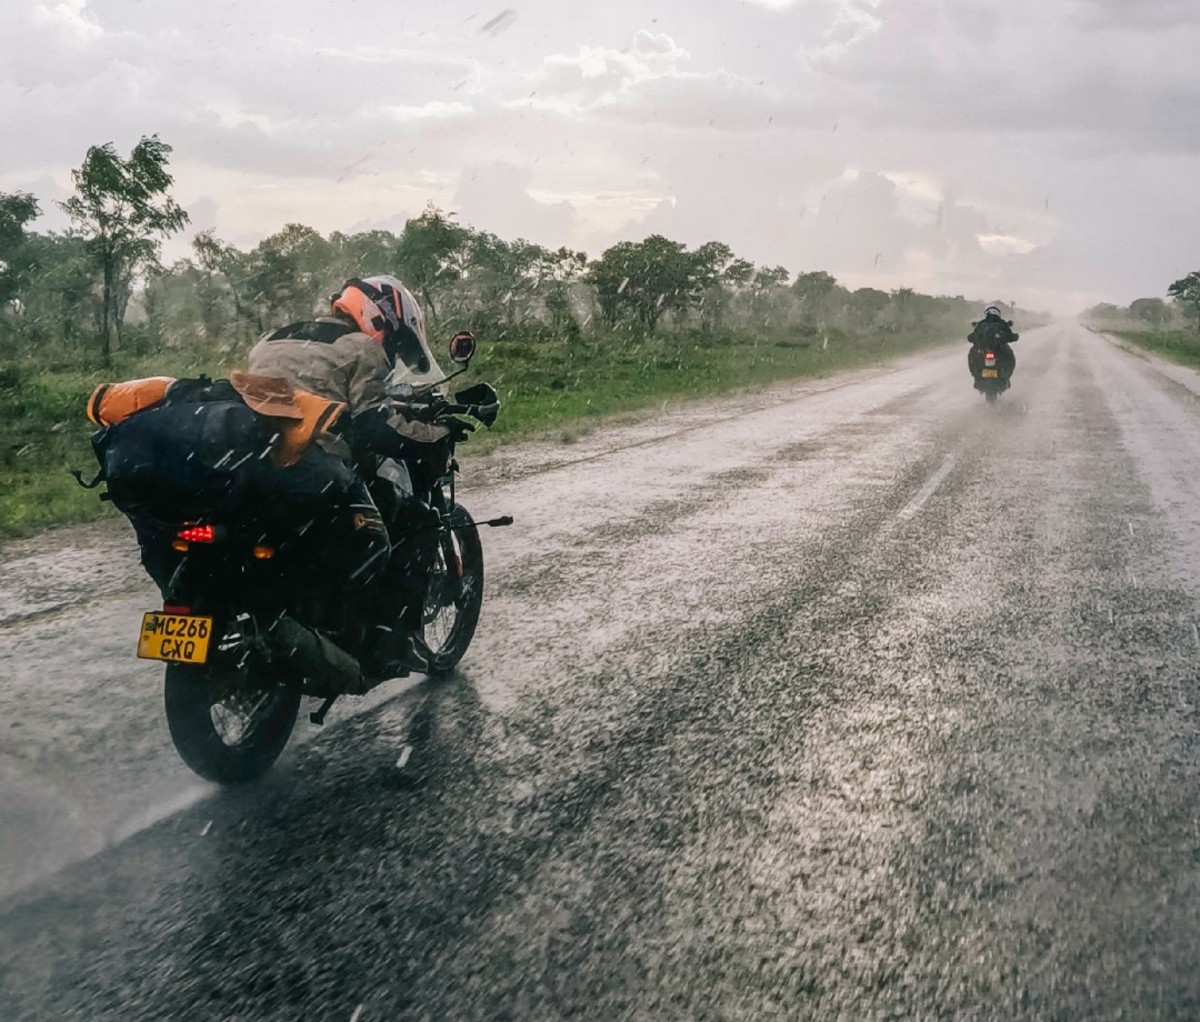 Motorcyclists ride along an asphalt road in the rain during the Kili-Cape Town ride